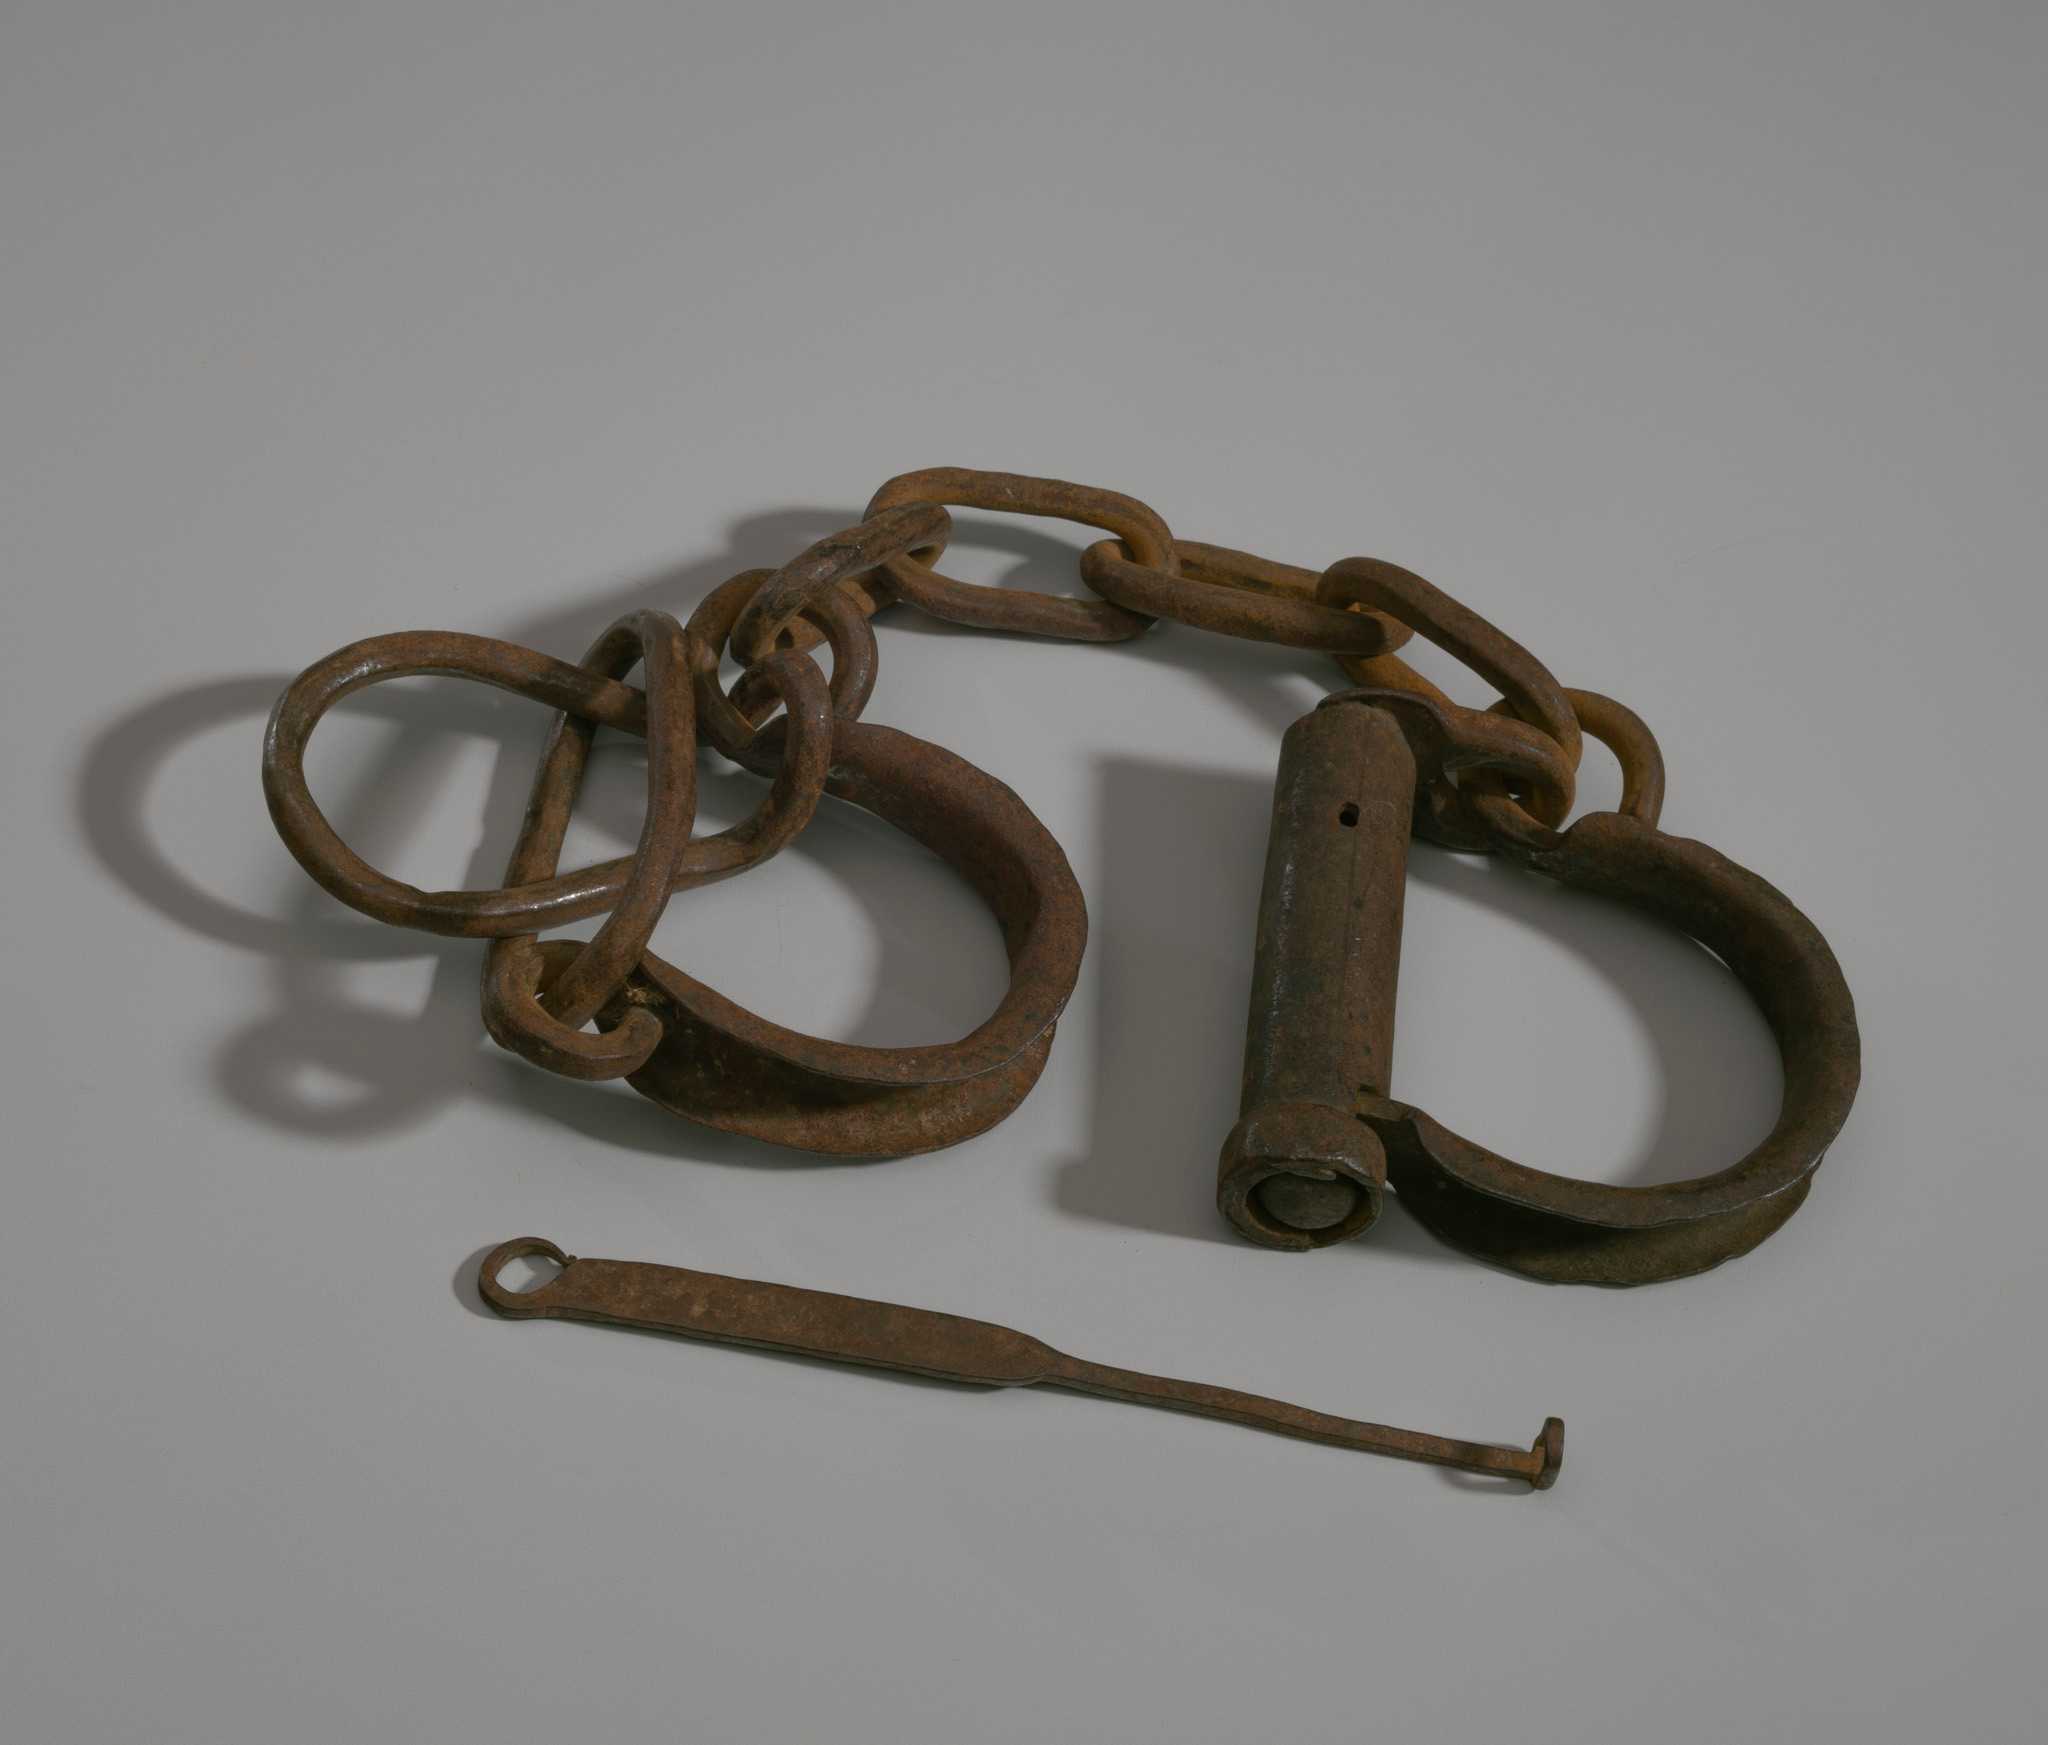 Metal shackle connected by a four link chain to a pair of metal loops. Shackle has a small hole for a key. Key (.2) consists of as thin piece of metal with small loop at end the faces forward. A flat loop is found at the opposite end of the key.